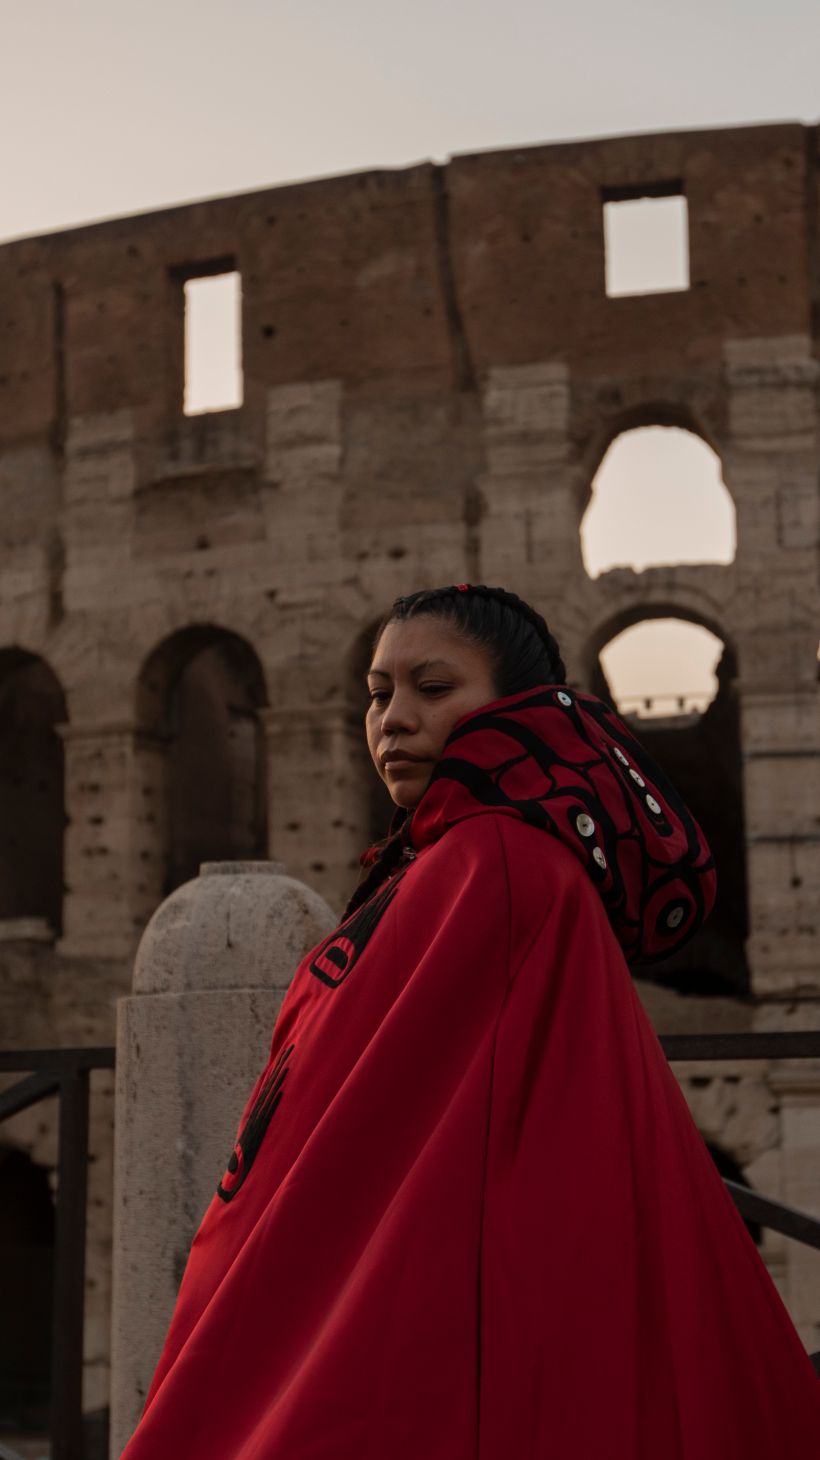 A photo of Laurelei Williams at the Colosseum in Rome, Italy.